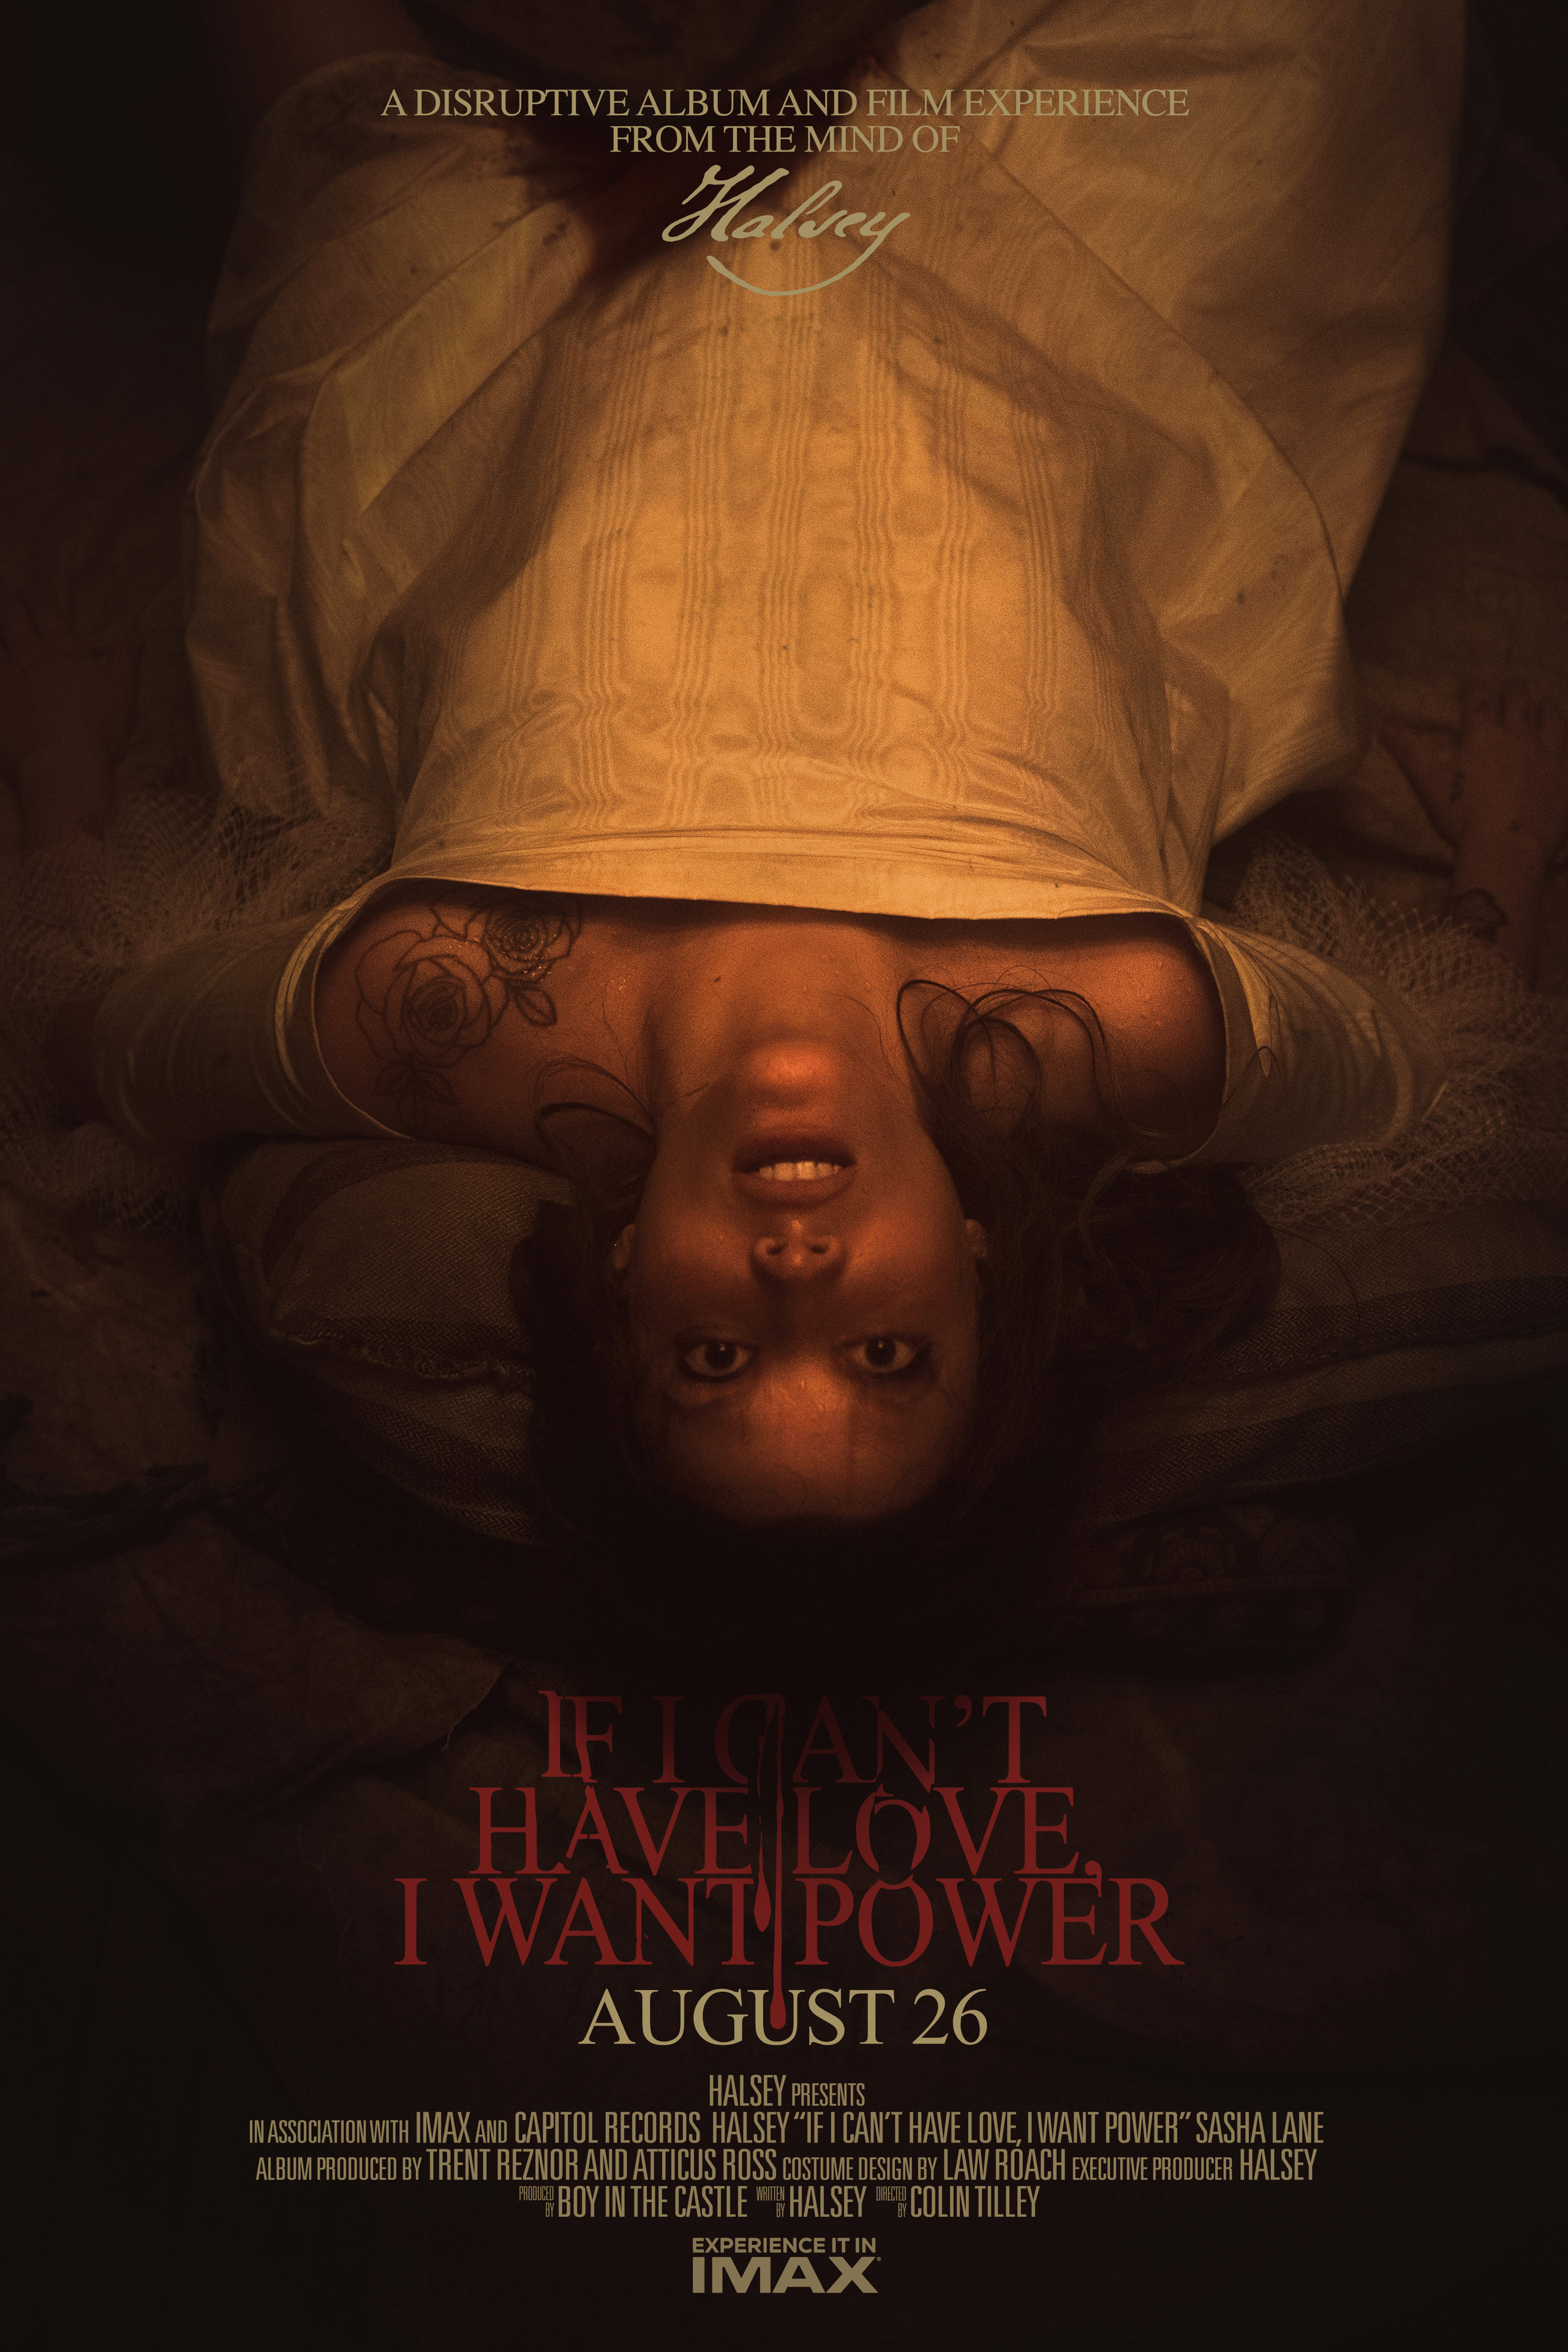 IMAX Exclusive: Halsey presents If I Can’t Have Love, I Want Power